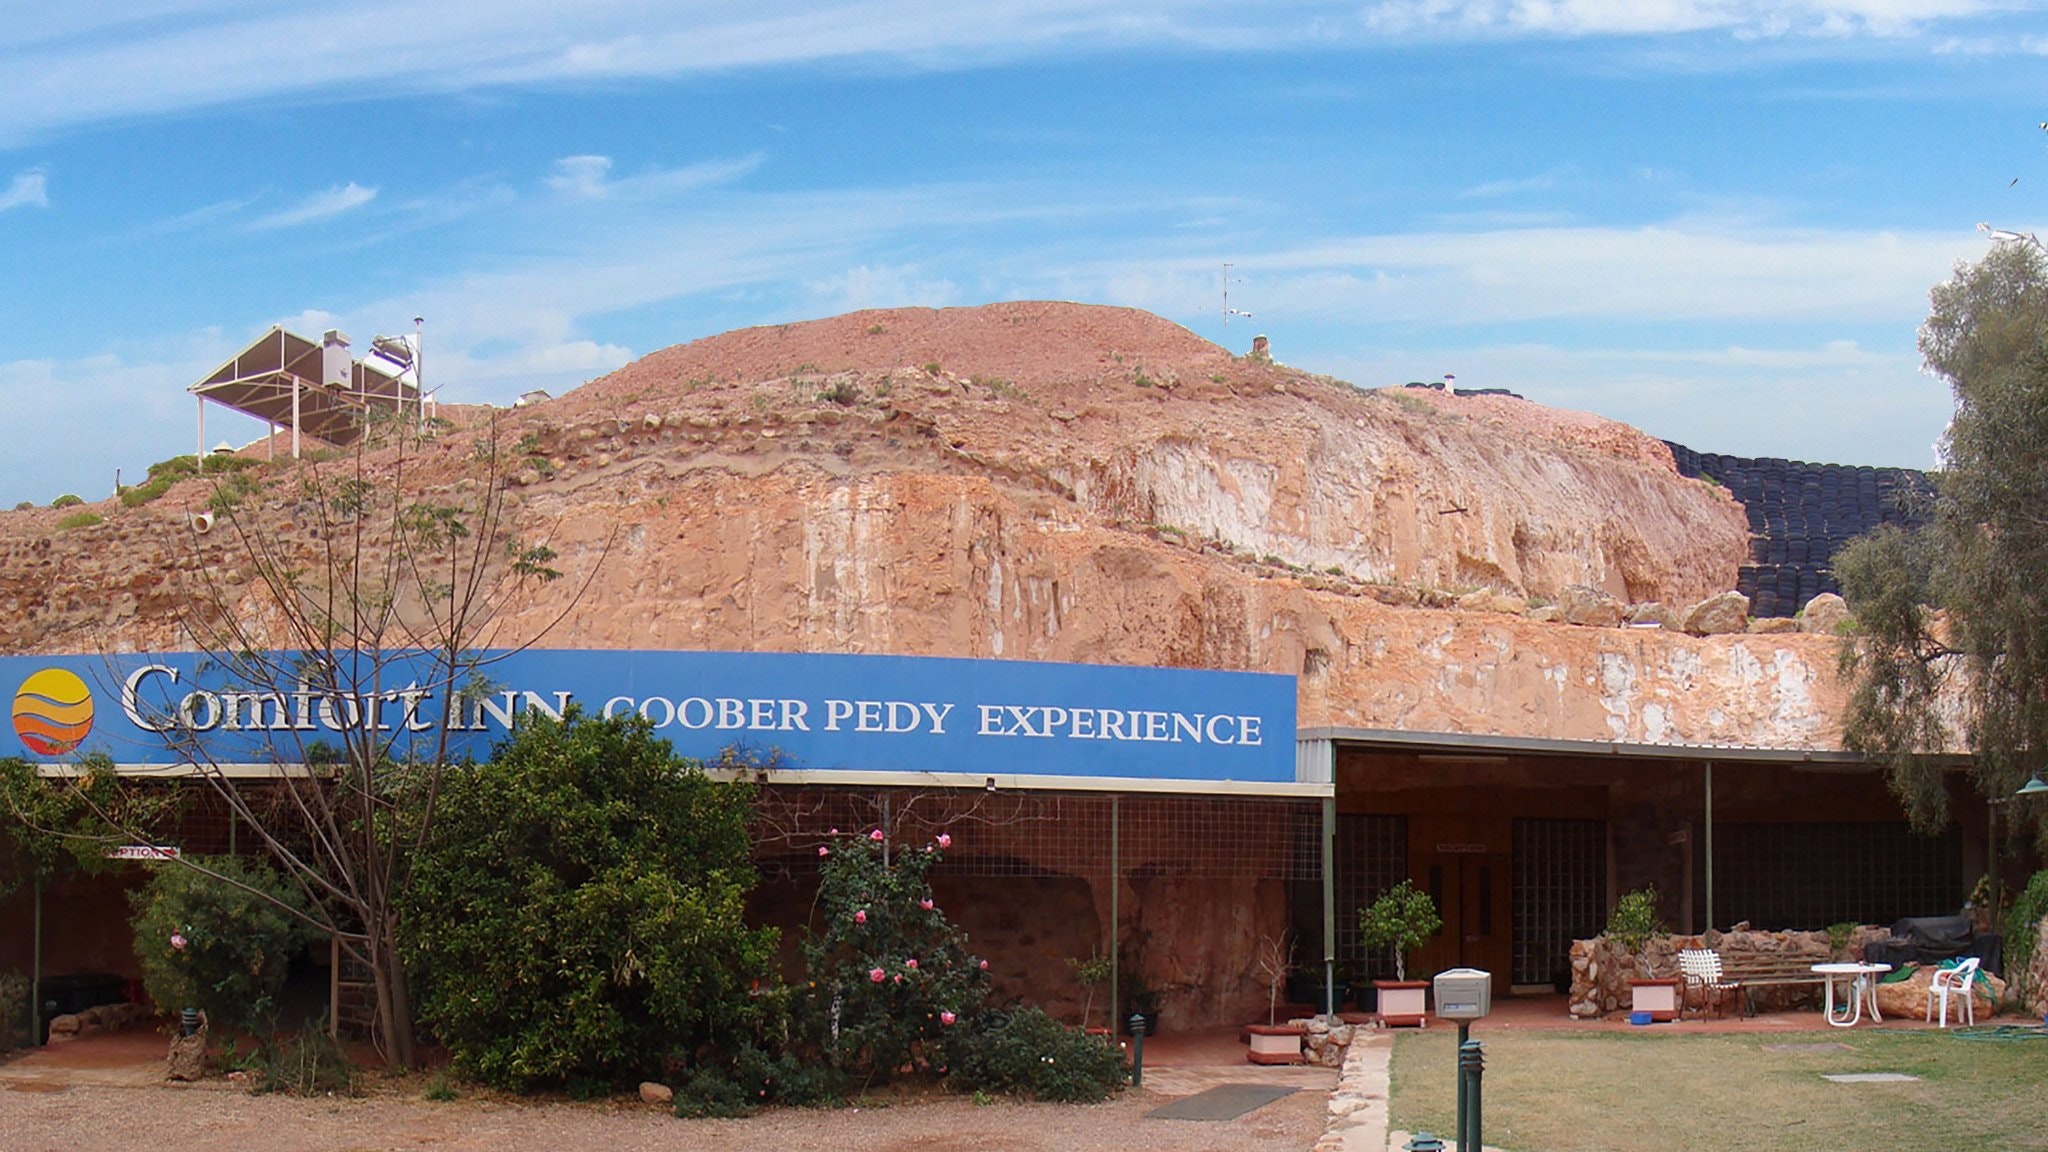 Comfort Inn Coober Pedy Experience Motel - 2032 Olympic Games